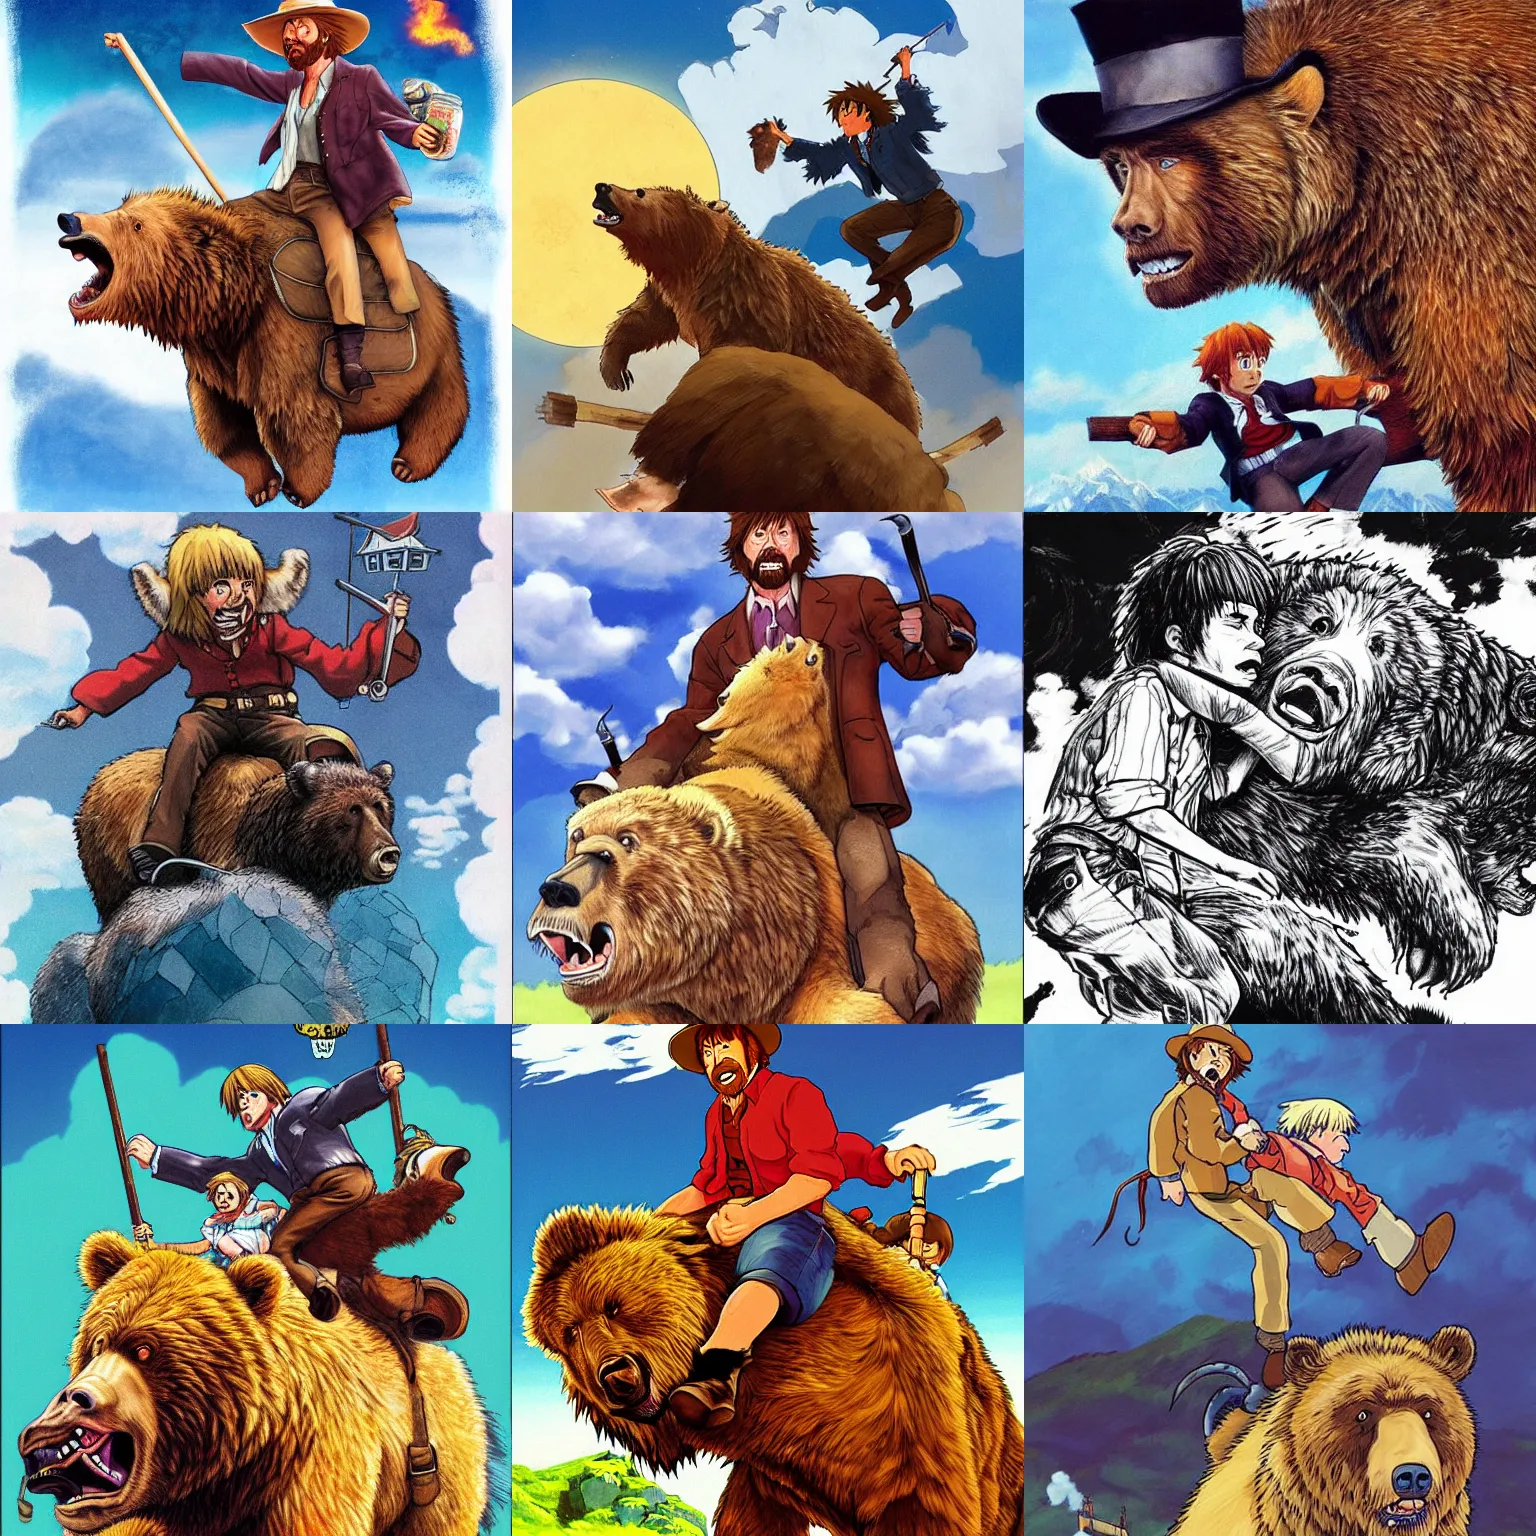 Prompt: semi realistic illustration of chuck norris riding a giant grizzly bear in the style of howl's moving castle by miyazaki